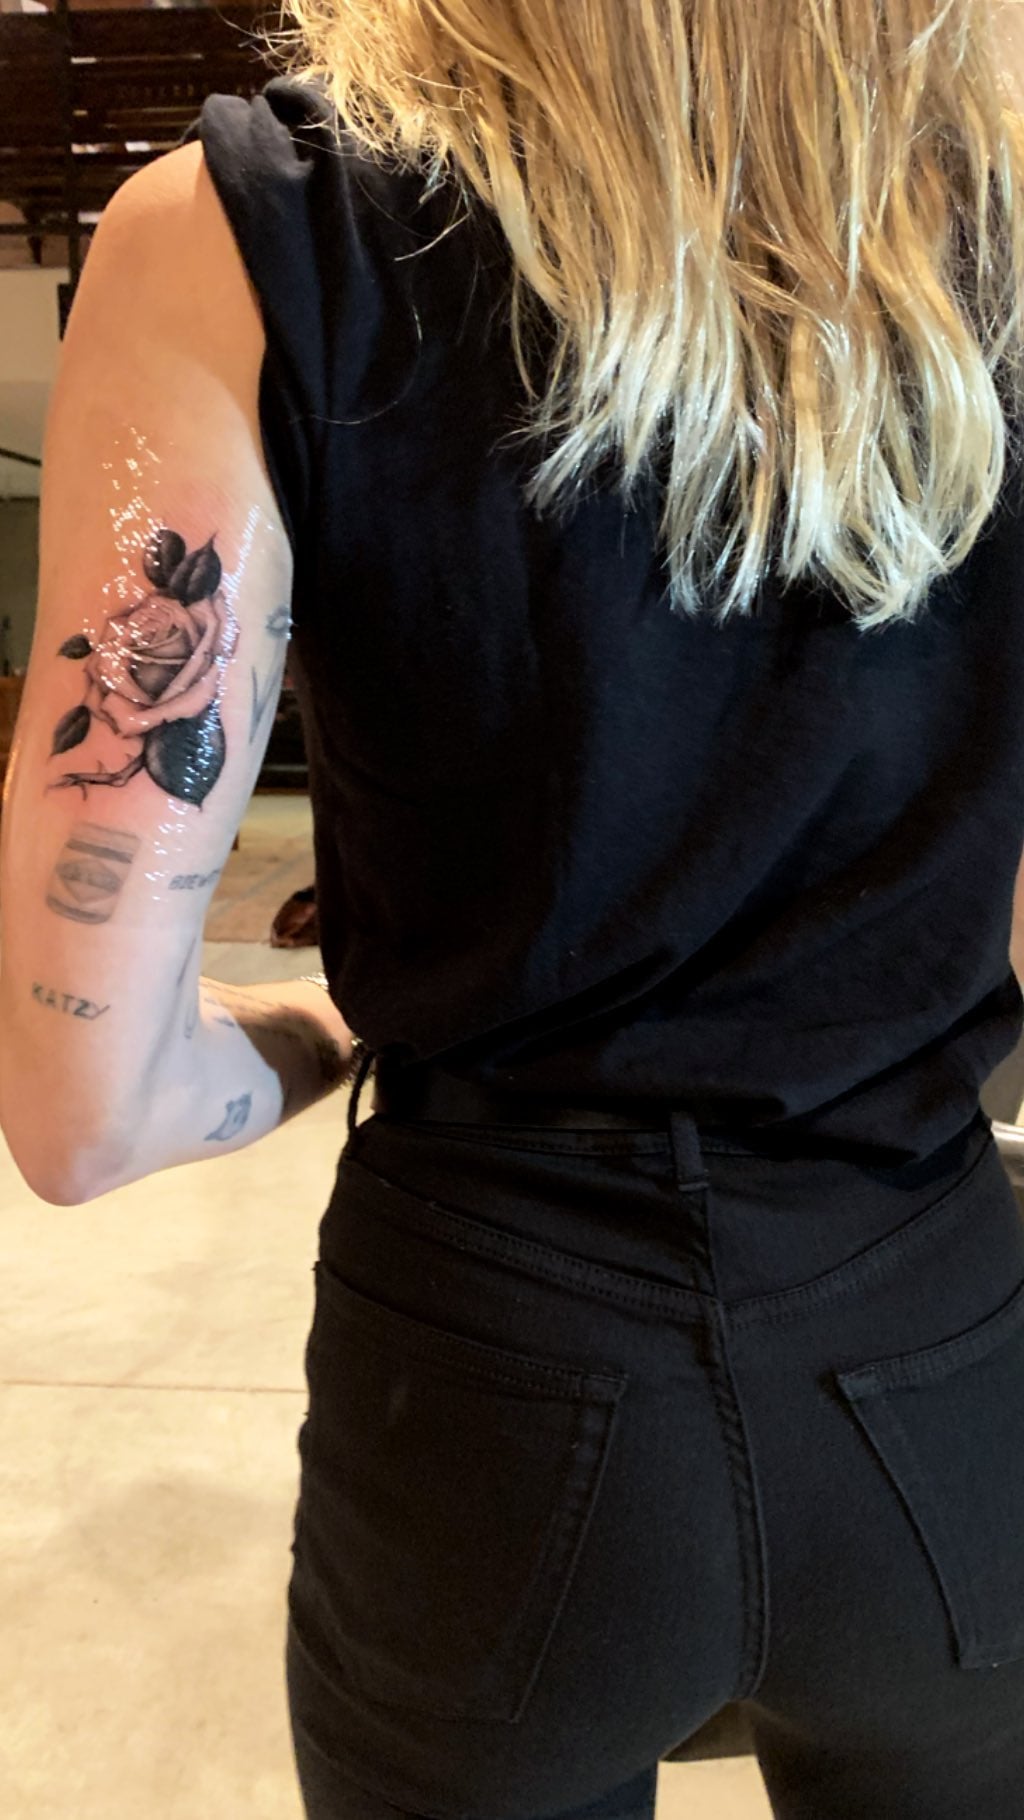 Demi Lovato Covers Up Lip Print Tattoo With New Rose Ink PopStarTats